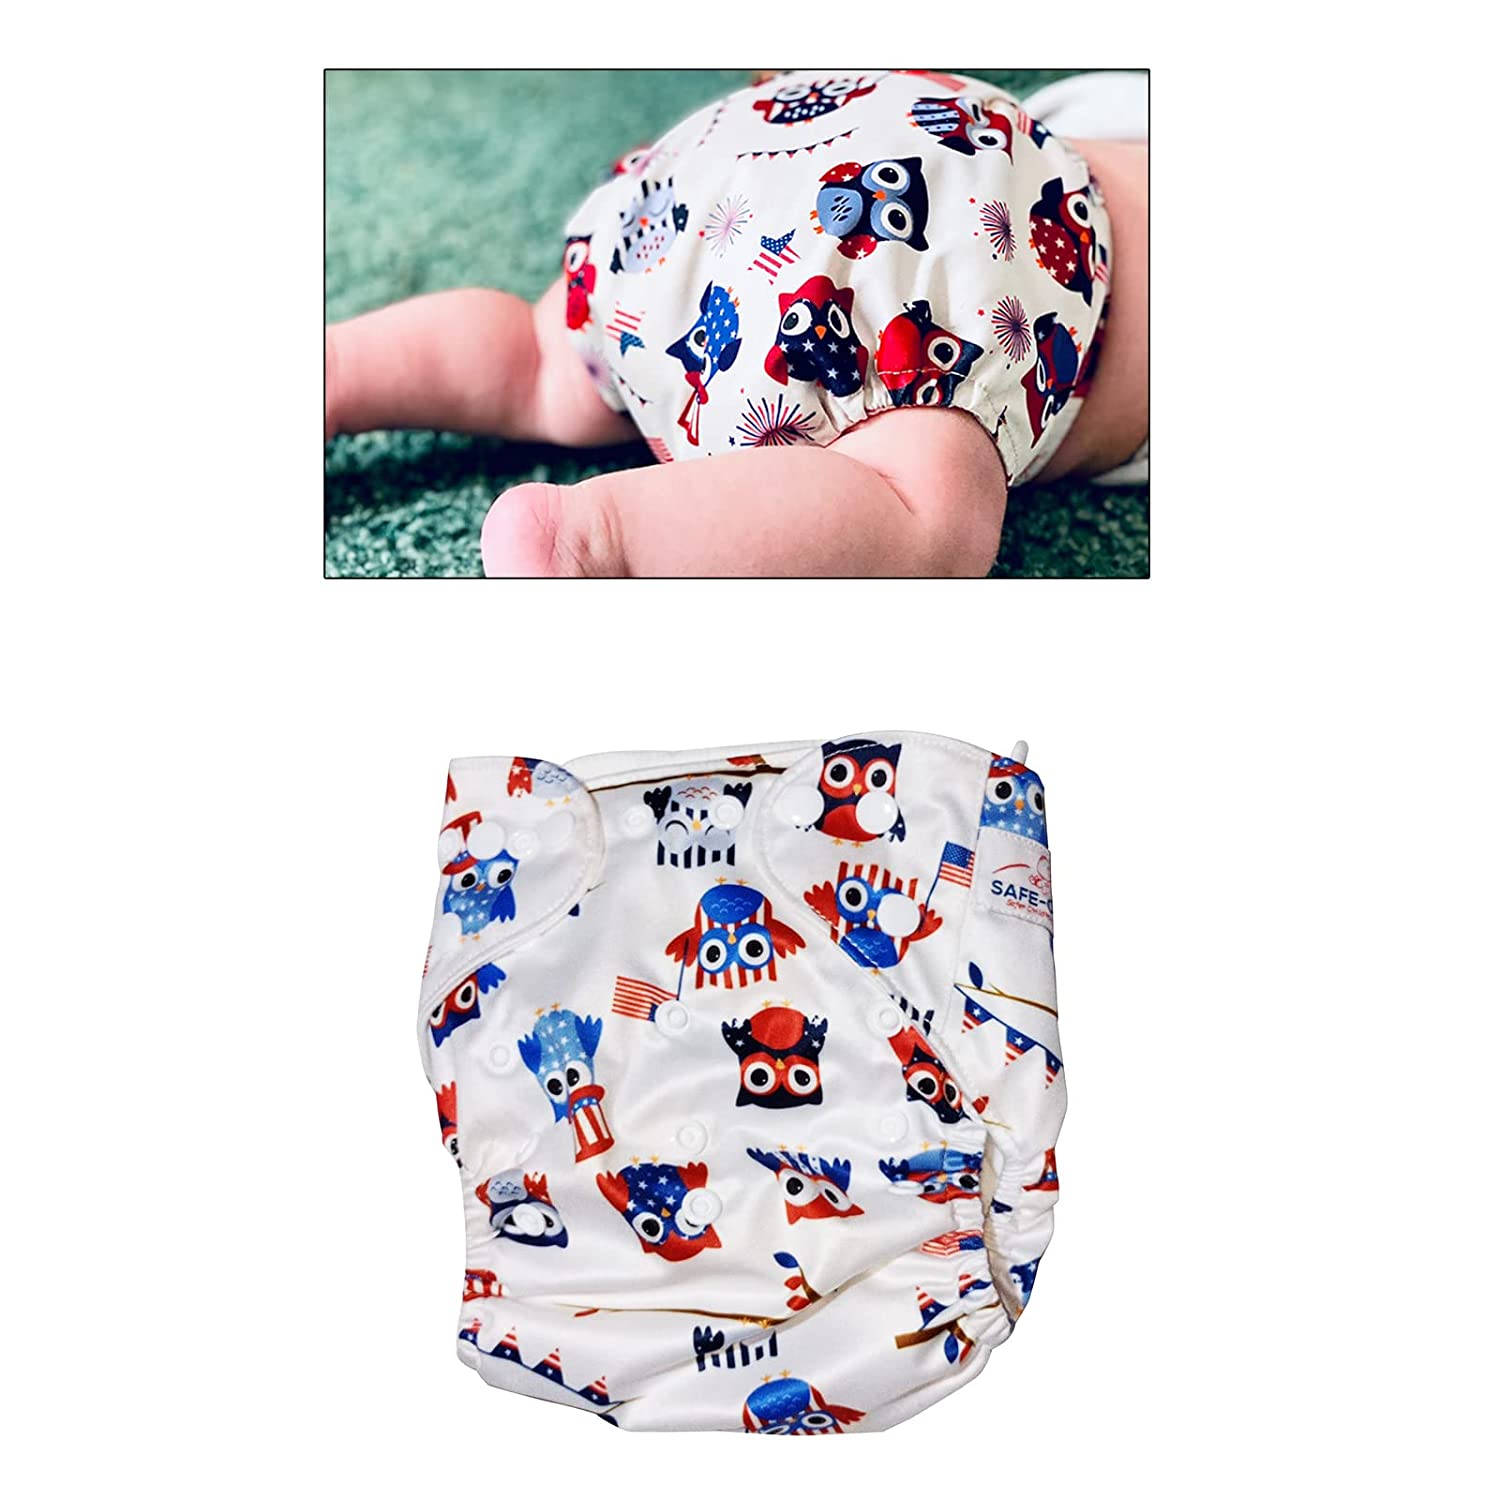 Buy Chinmay Kids Unisex Baby Washable Diaper Pants in Polyester PVC Animal  Print Design for Child Newborn Baby in Medium Size  M Pack of 6 Online  at Low Prices in India 